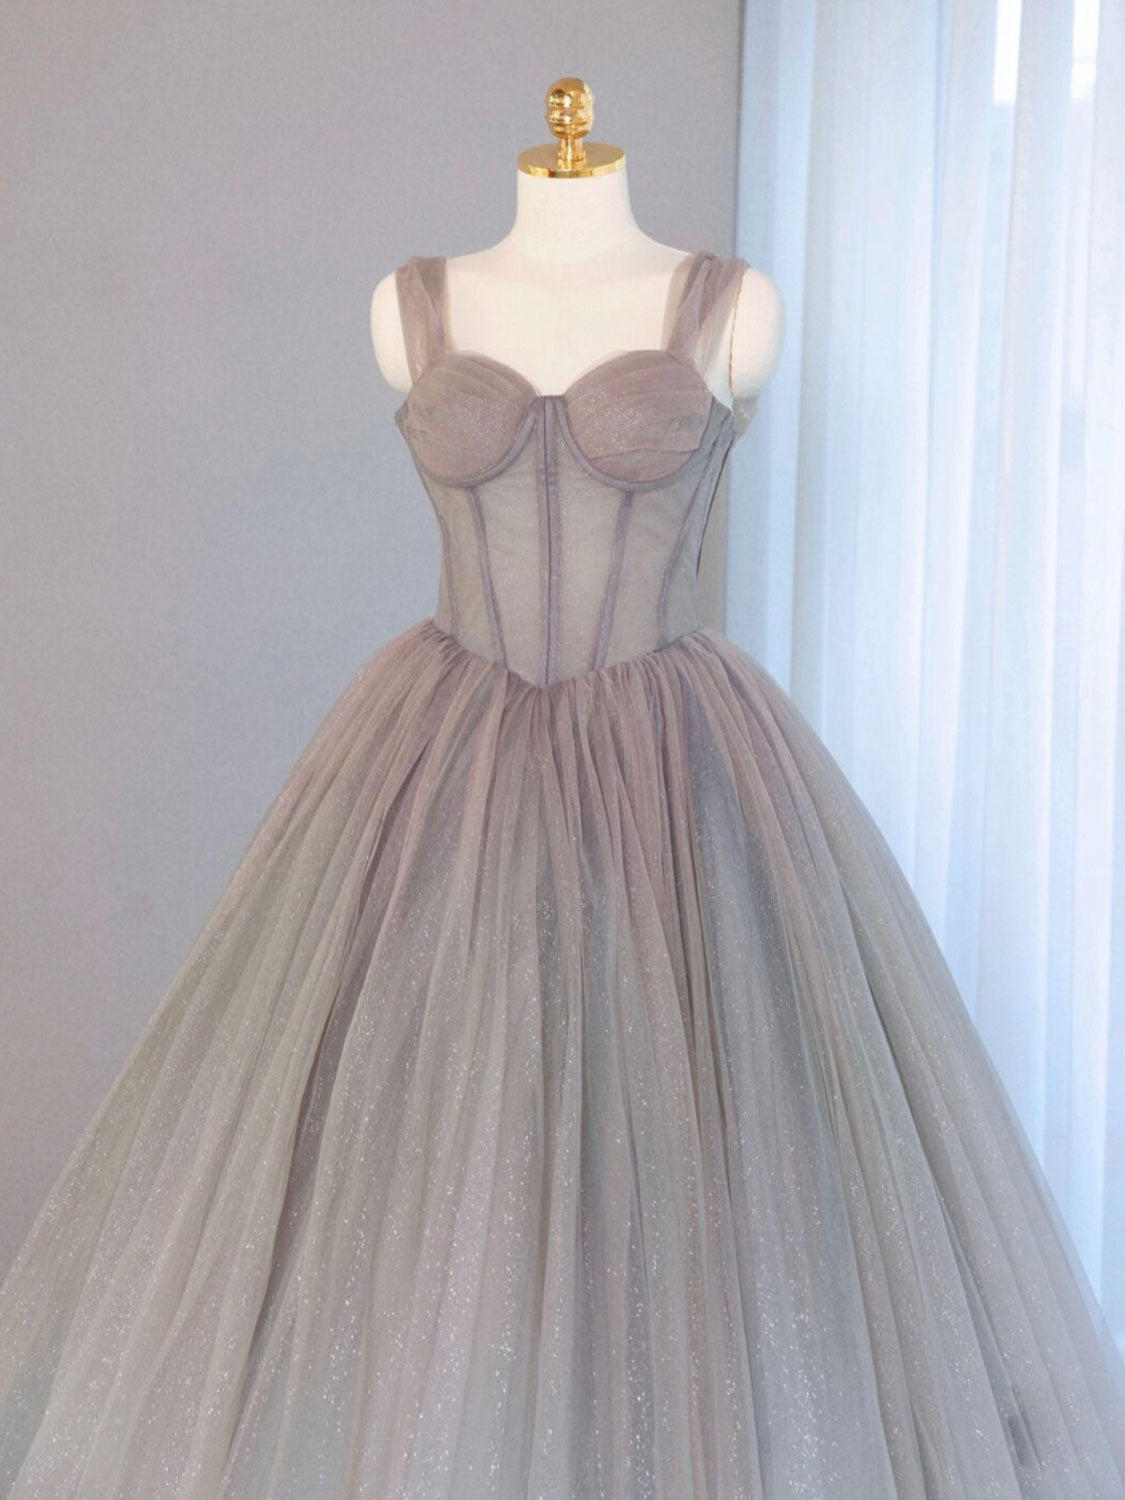 Homecoming Dress Shopping, A-Line Gray Sweetheart Neck Long Prom Dresses, Gray Formal Evening Dress